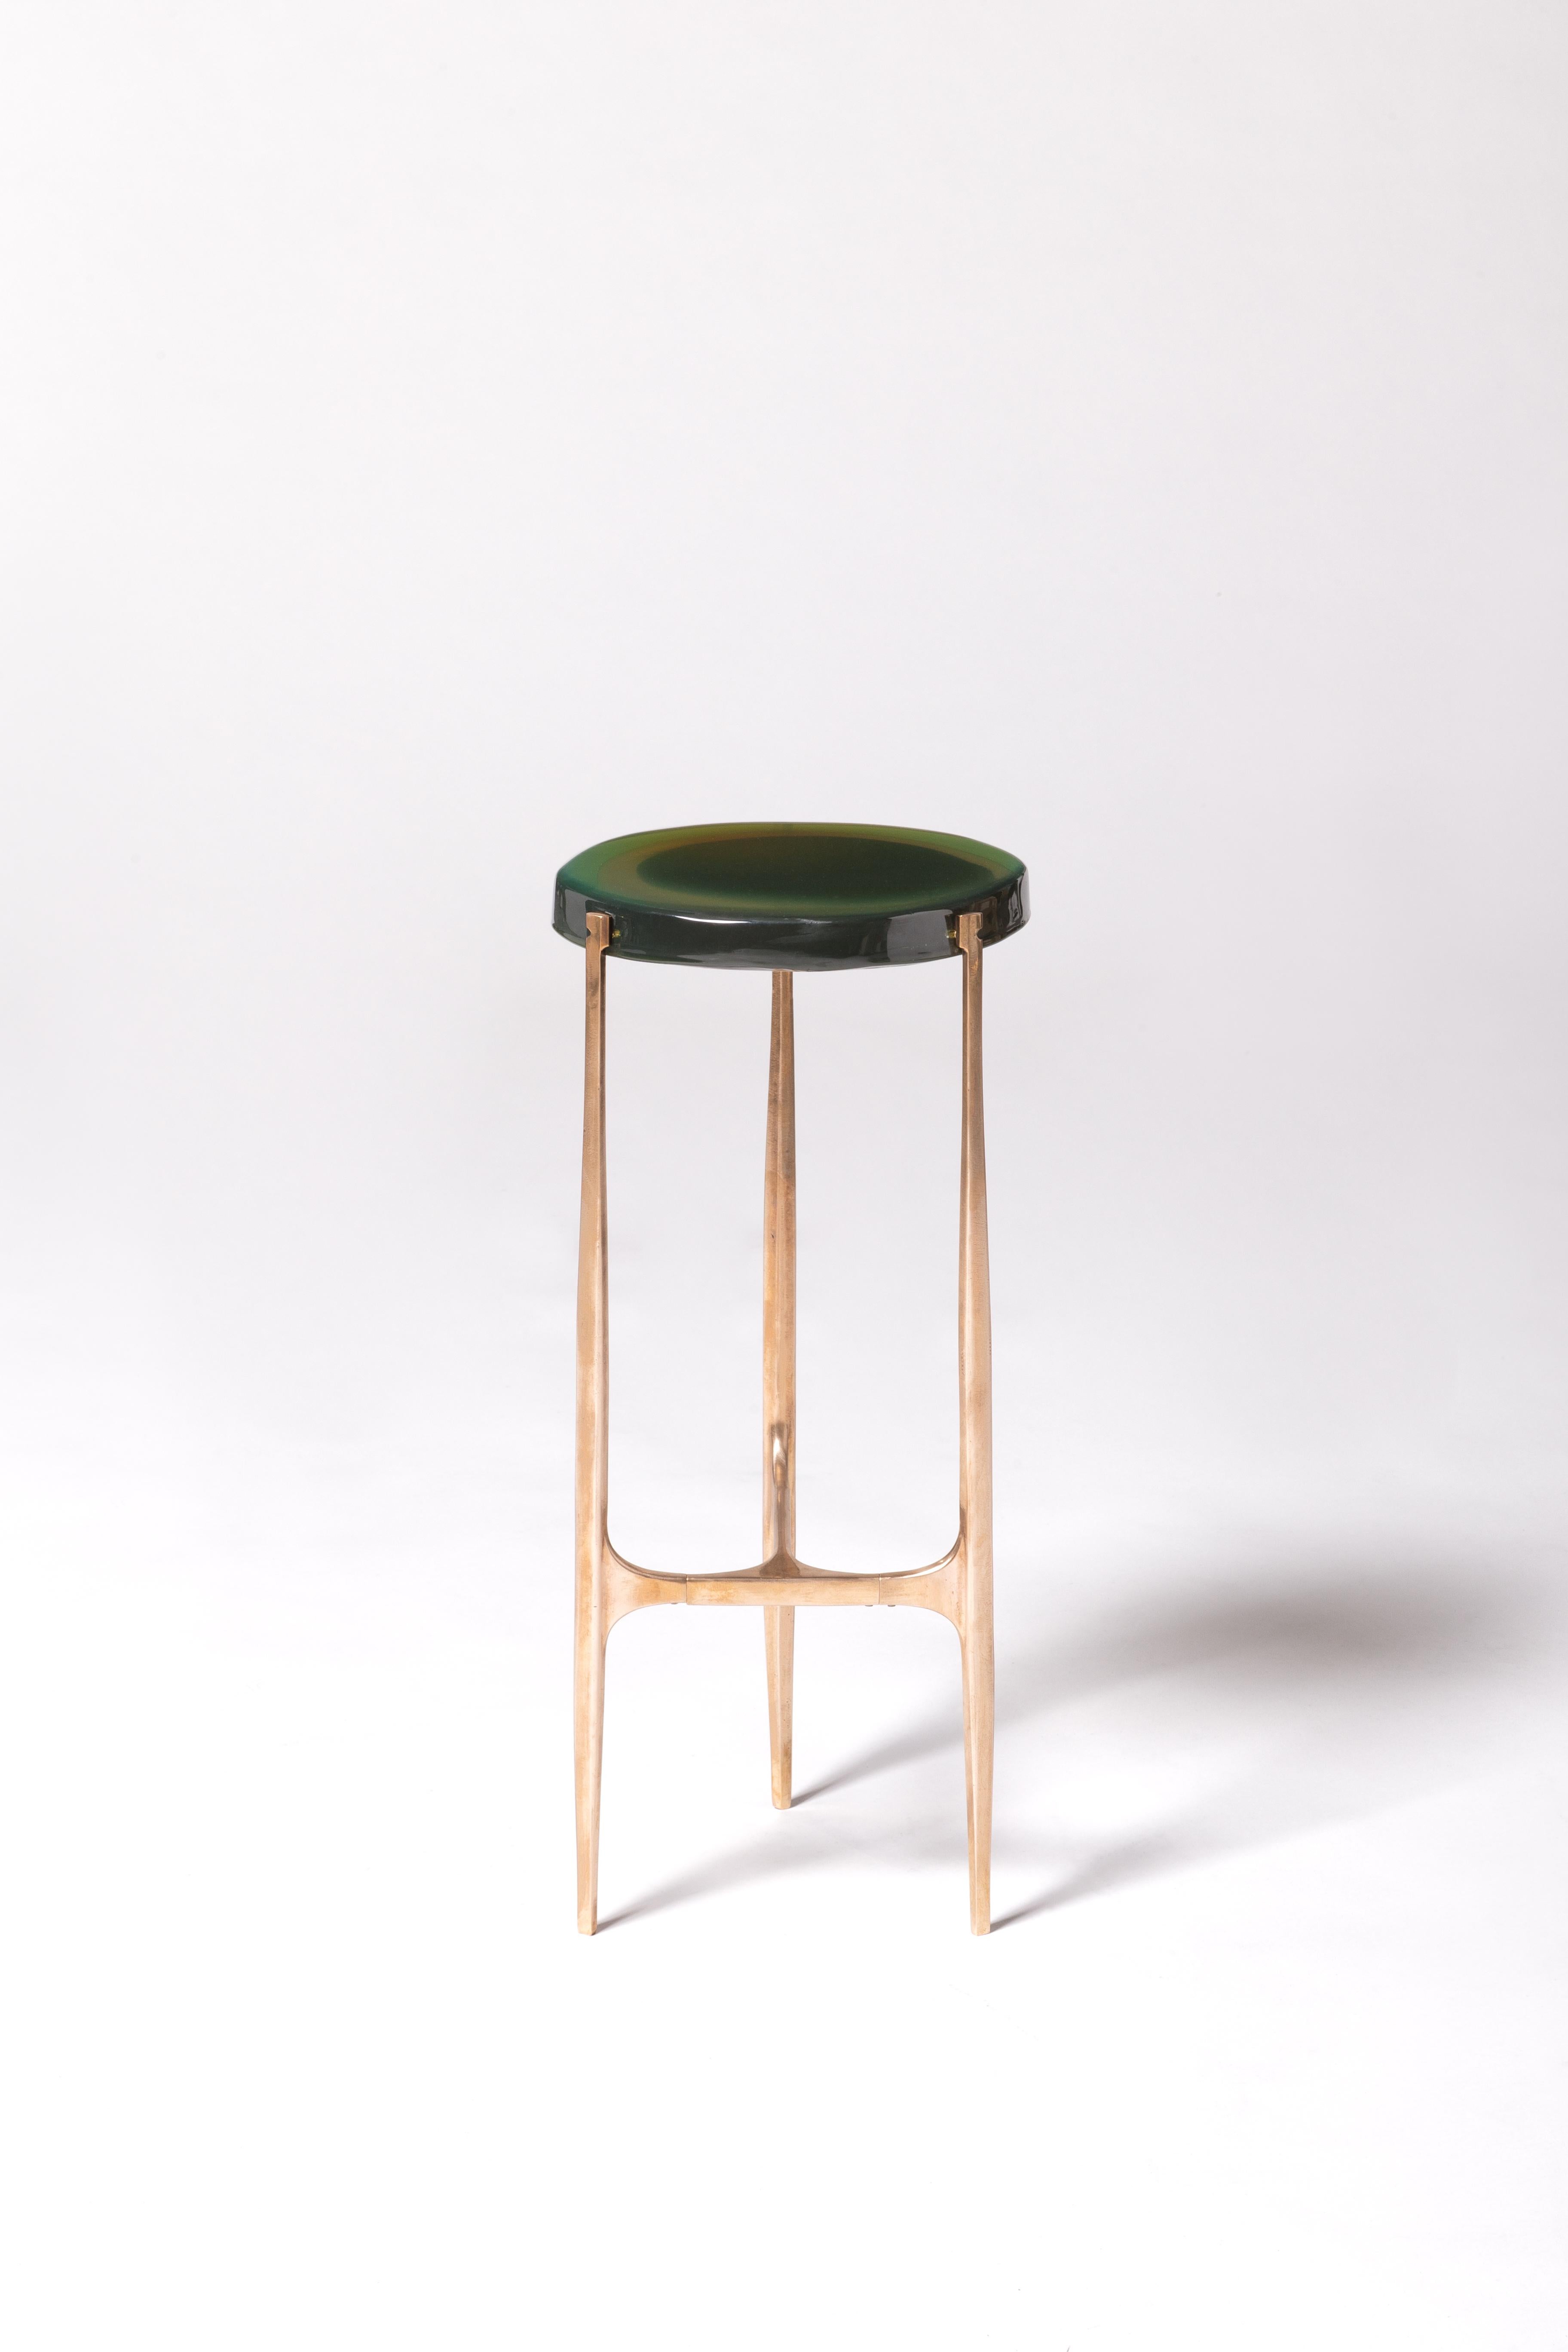 Agatha coffee table by Draga & Aurel
Dimensions: W 24 x D 24 x H 56
 top Ø 34 cm
Materials: Resin, bronze

The Agatha coffee tables are featured by irregular circular tops of transparent and
colorful resin sit on a bronze frame with a staggered